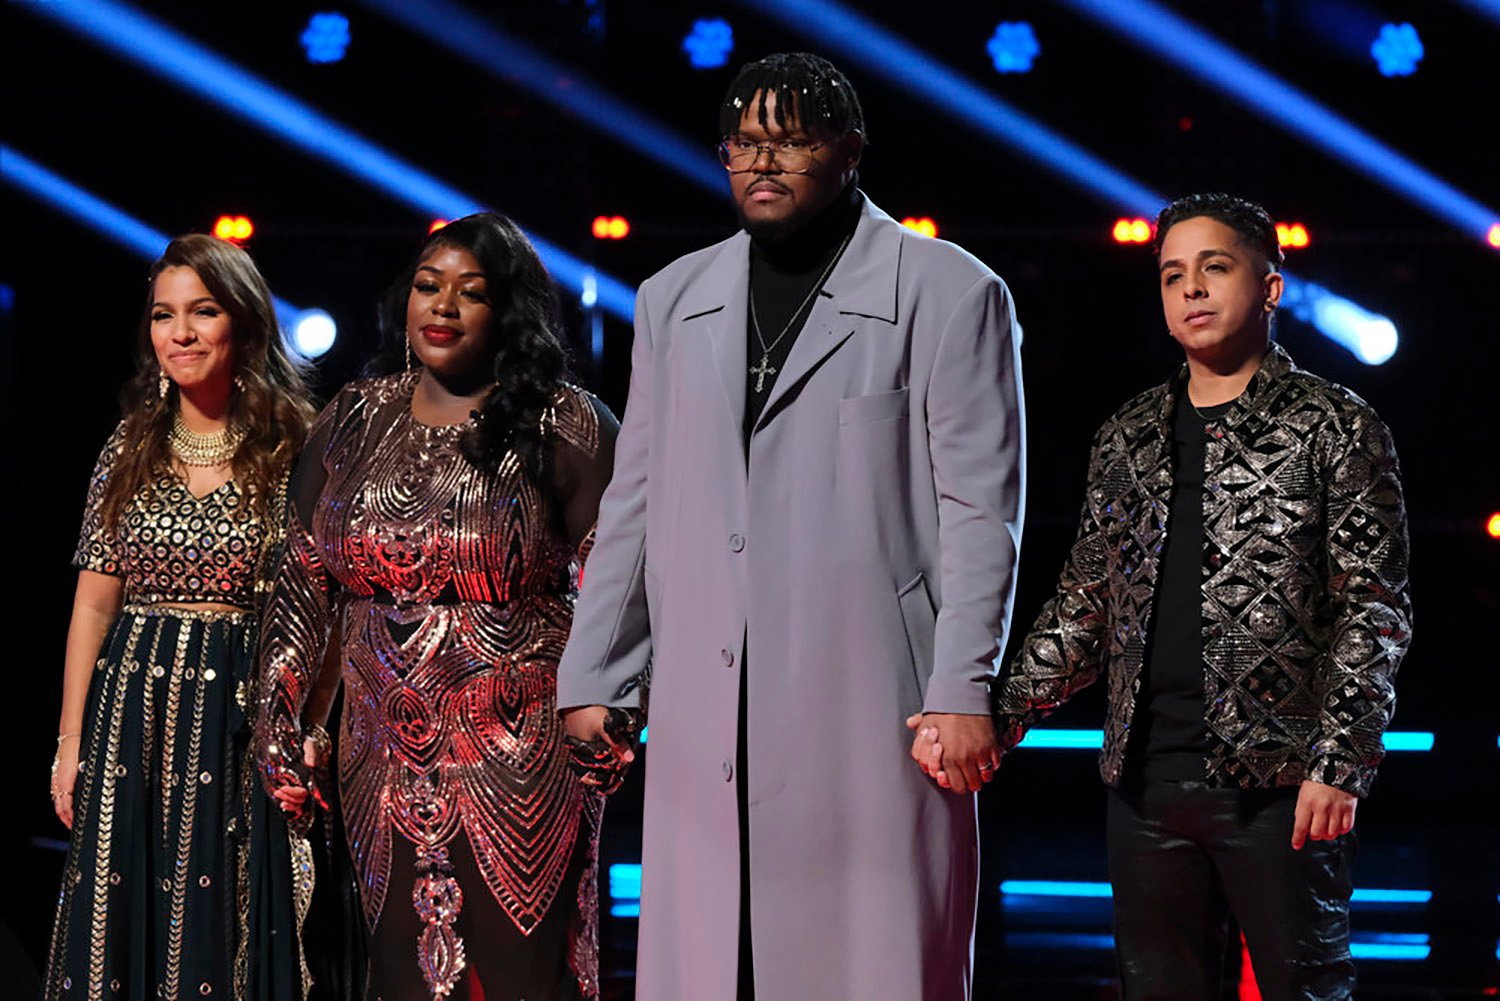 'The Voice' Many Fans Outraged, Demanding Change After 4 'Best